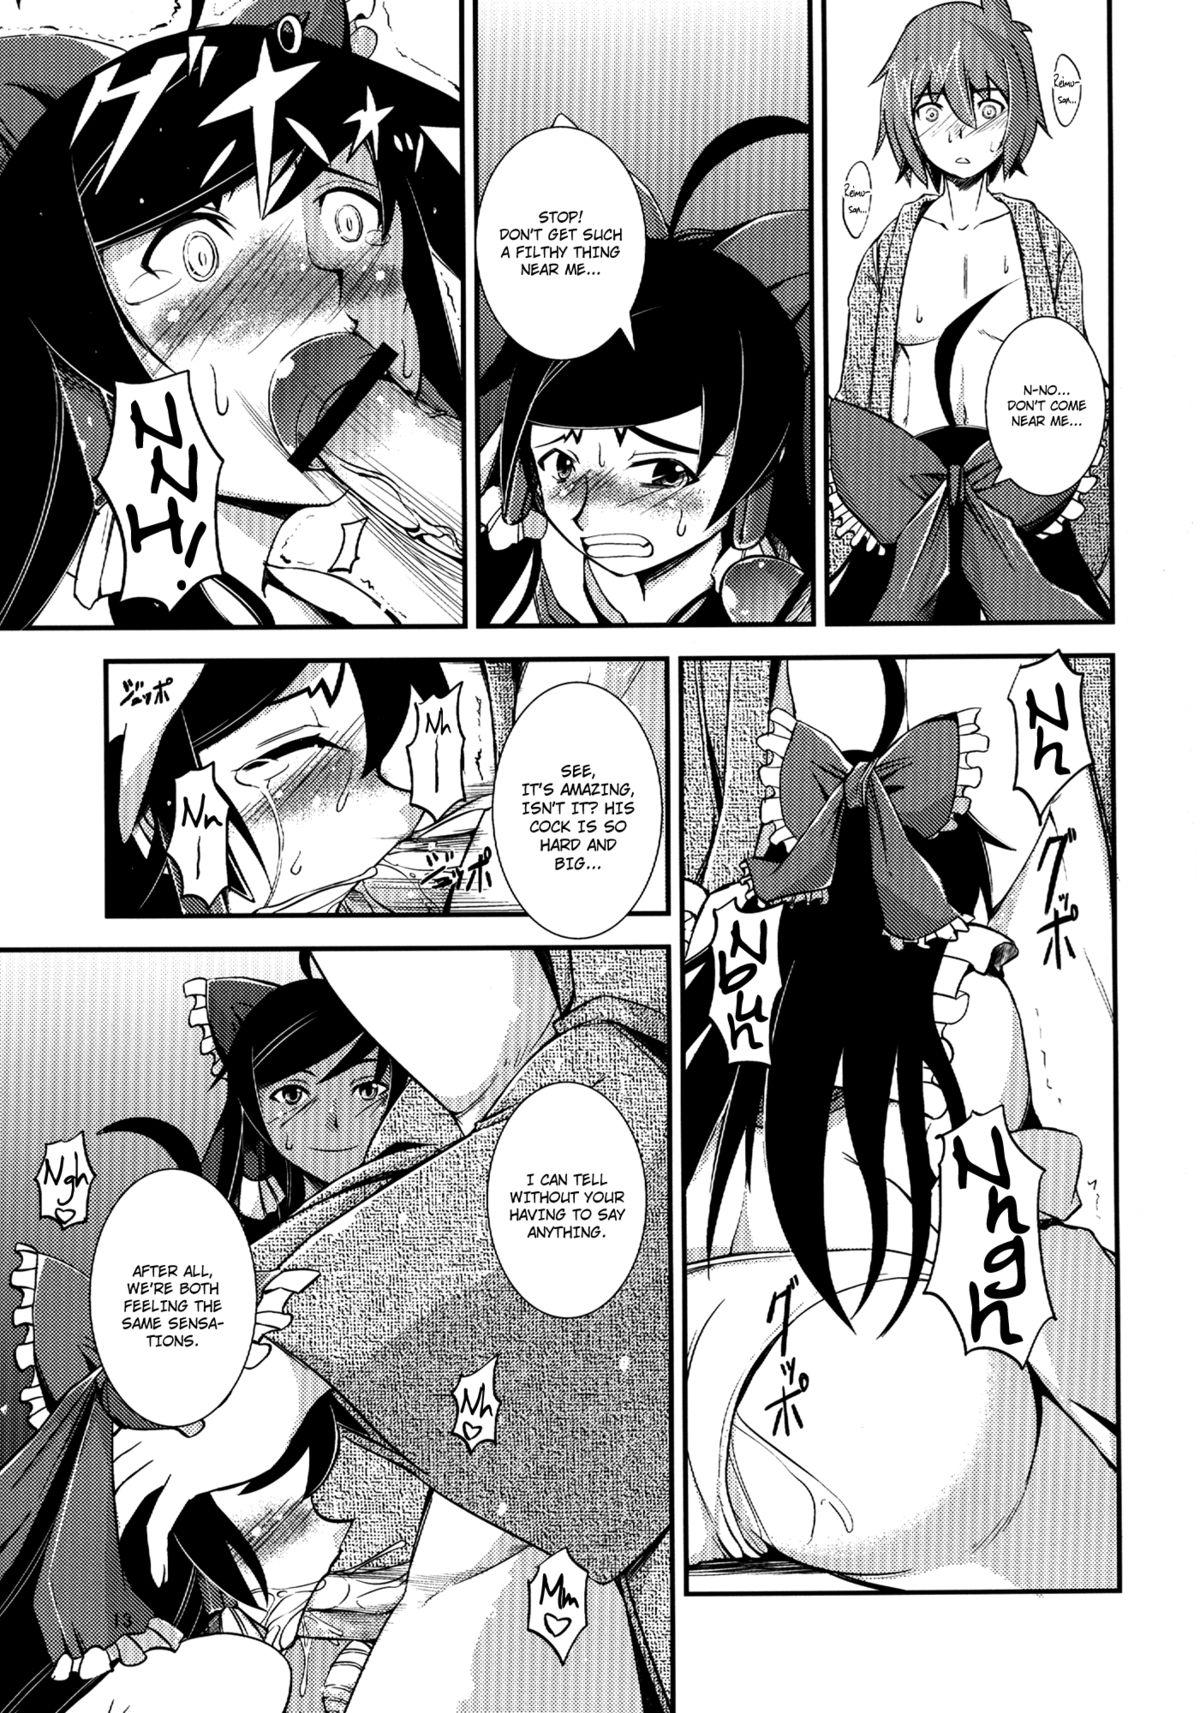 Tribute The Incident of the Black Shrine Maiden - Touhou project Porno Amateur - Page 13